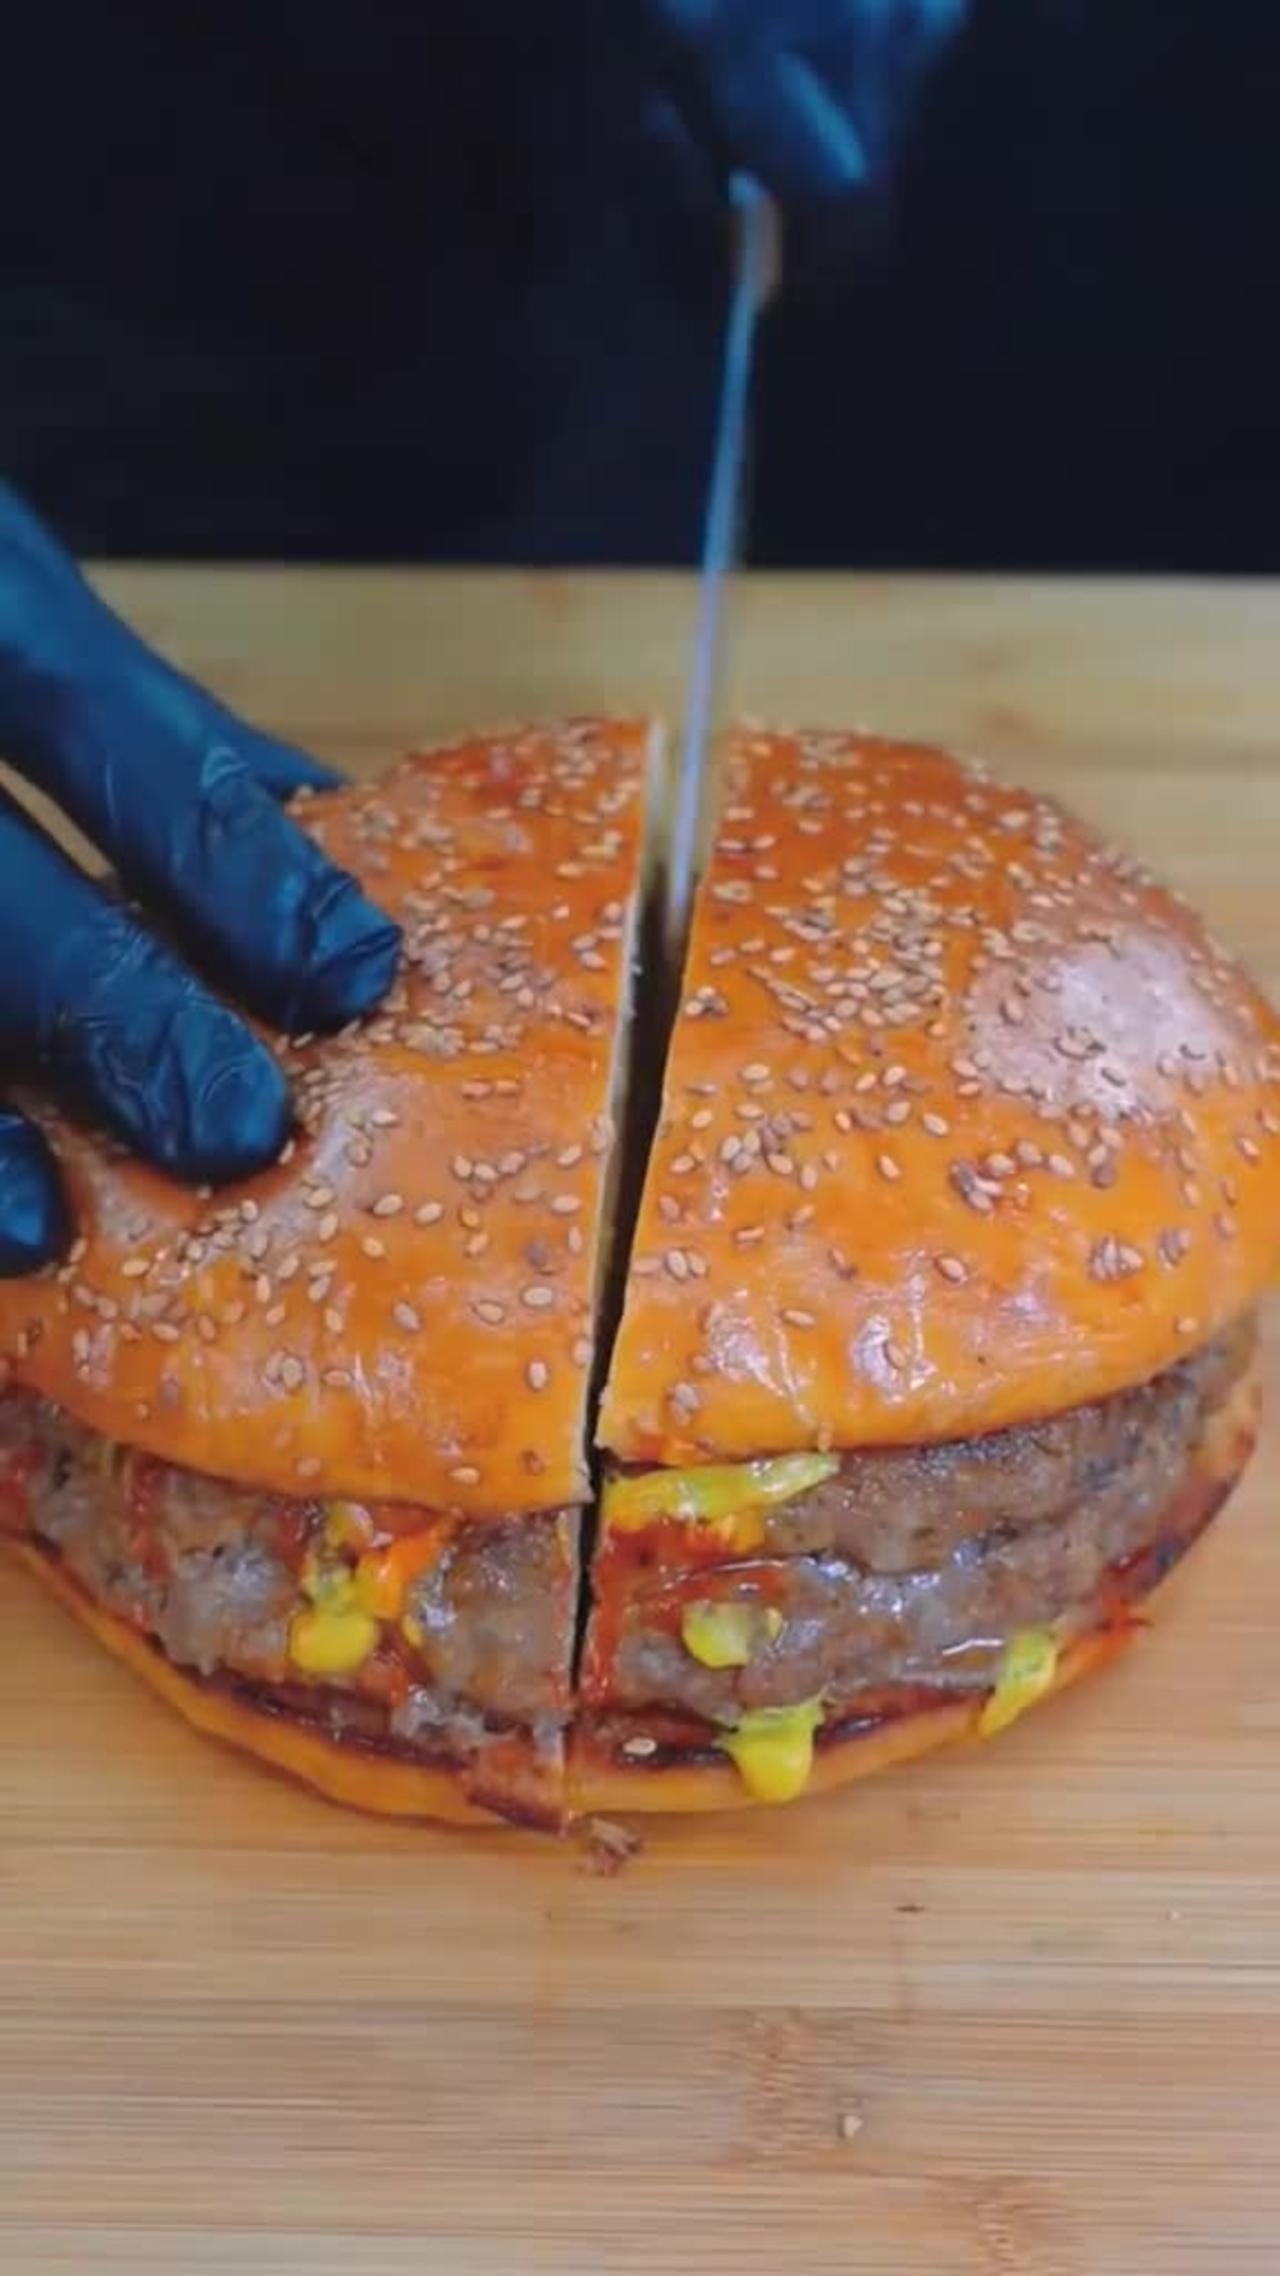 Ground beef and cheese makes a very large burger